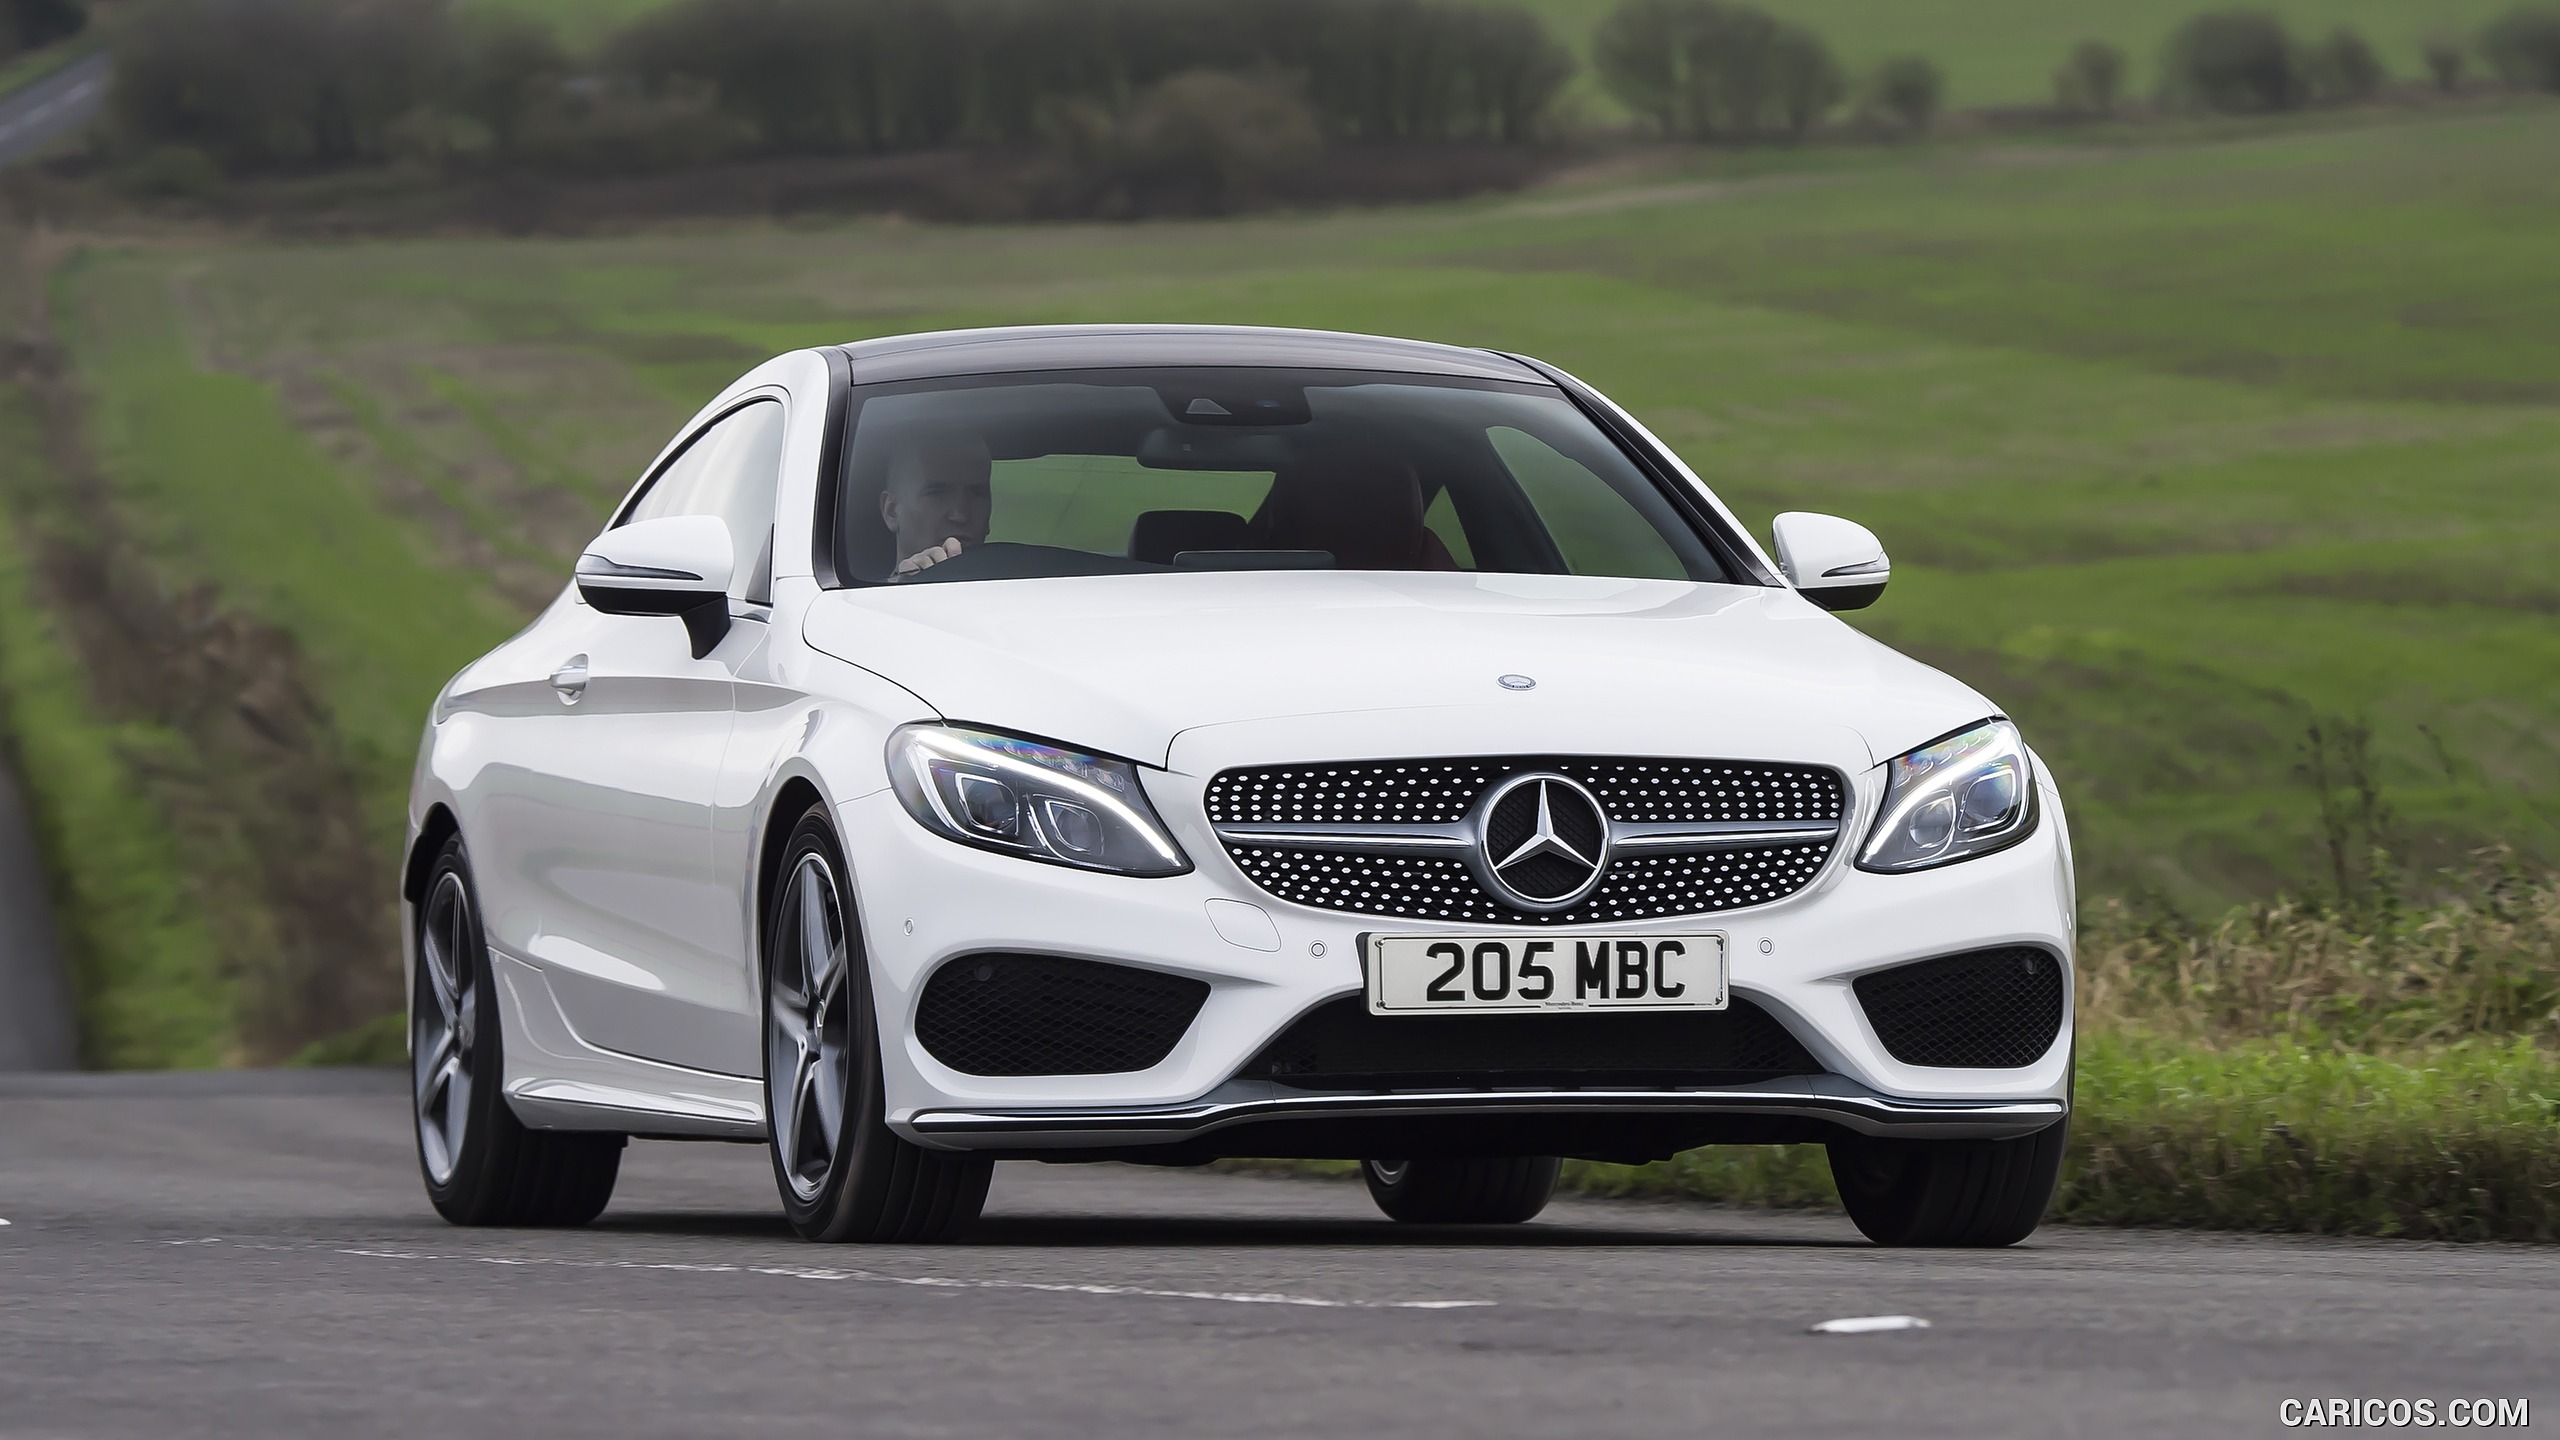 2017 Mercedes-Benz C-Class Coupe (UK-Spec) - Front, #136 of 210